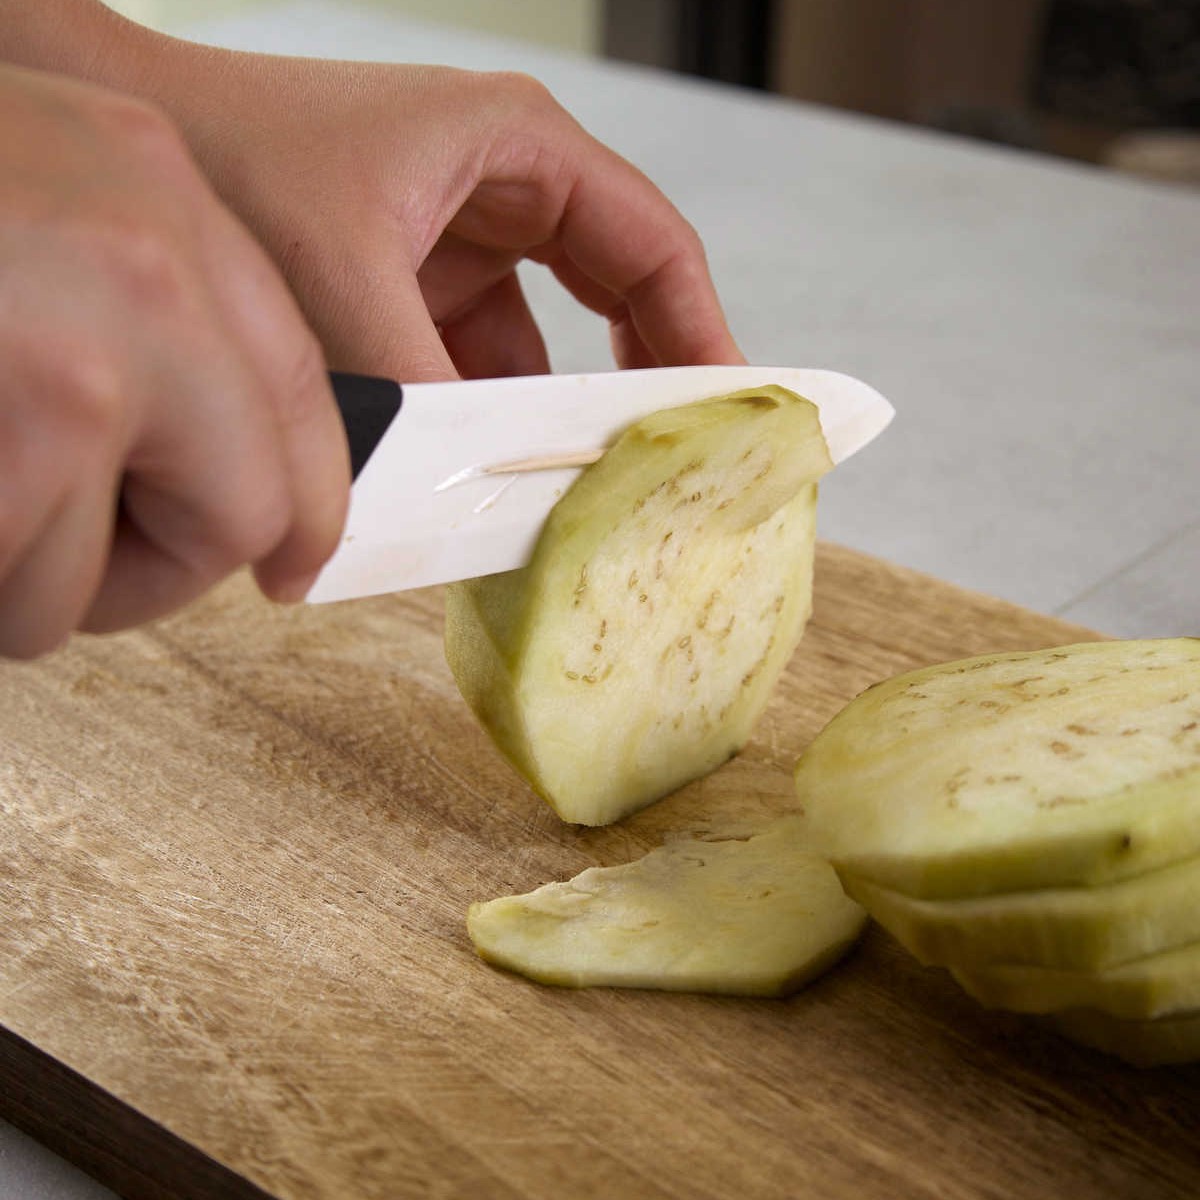 Use a Toothpick to Prevent the Vegetables From Sticking to the Knife